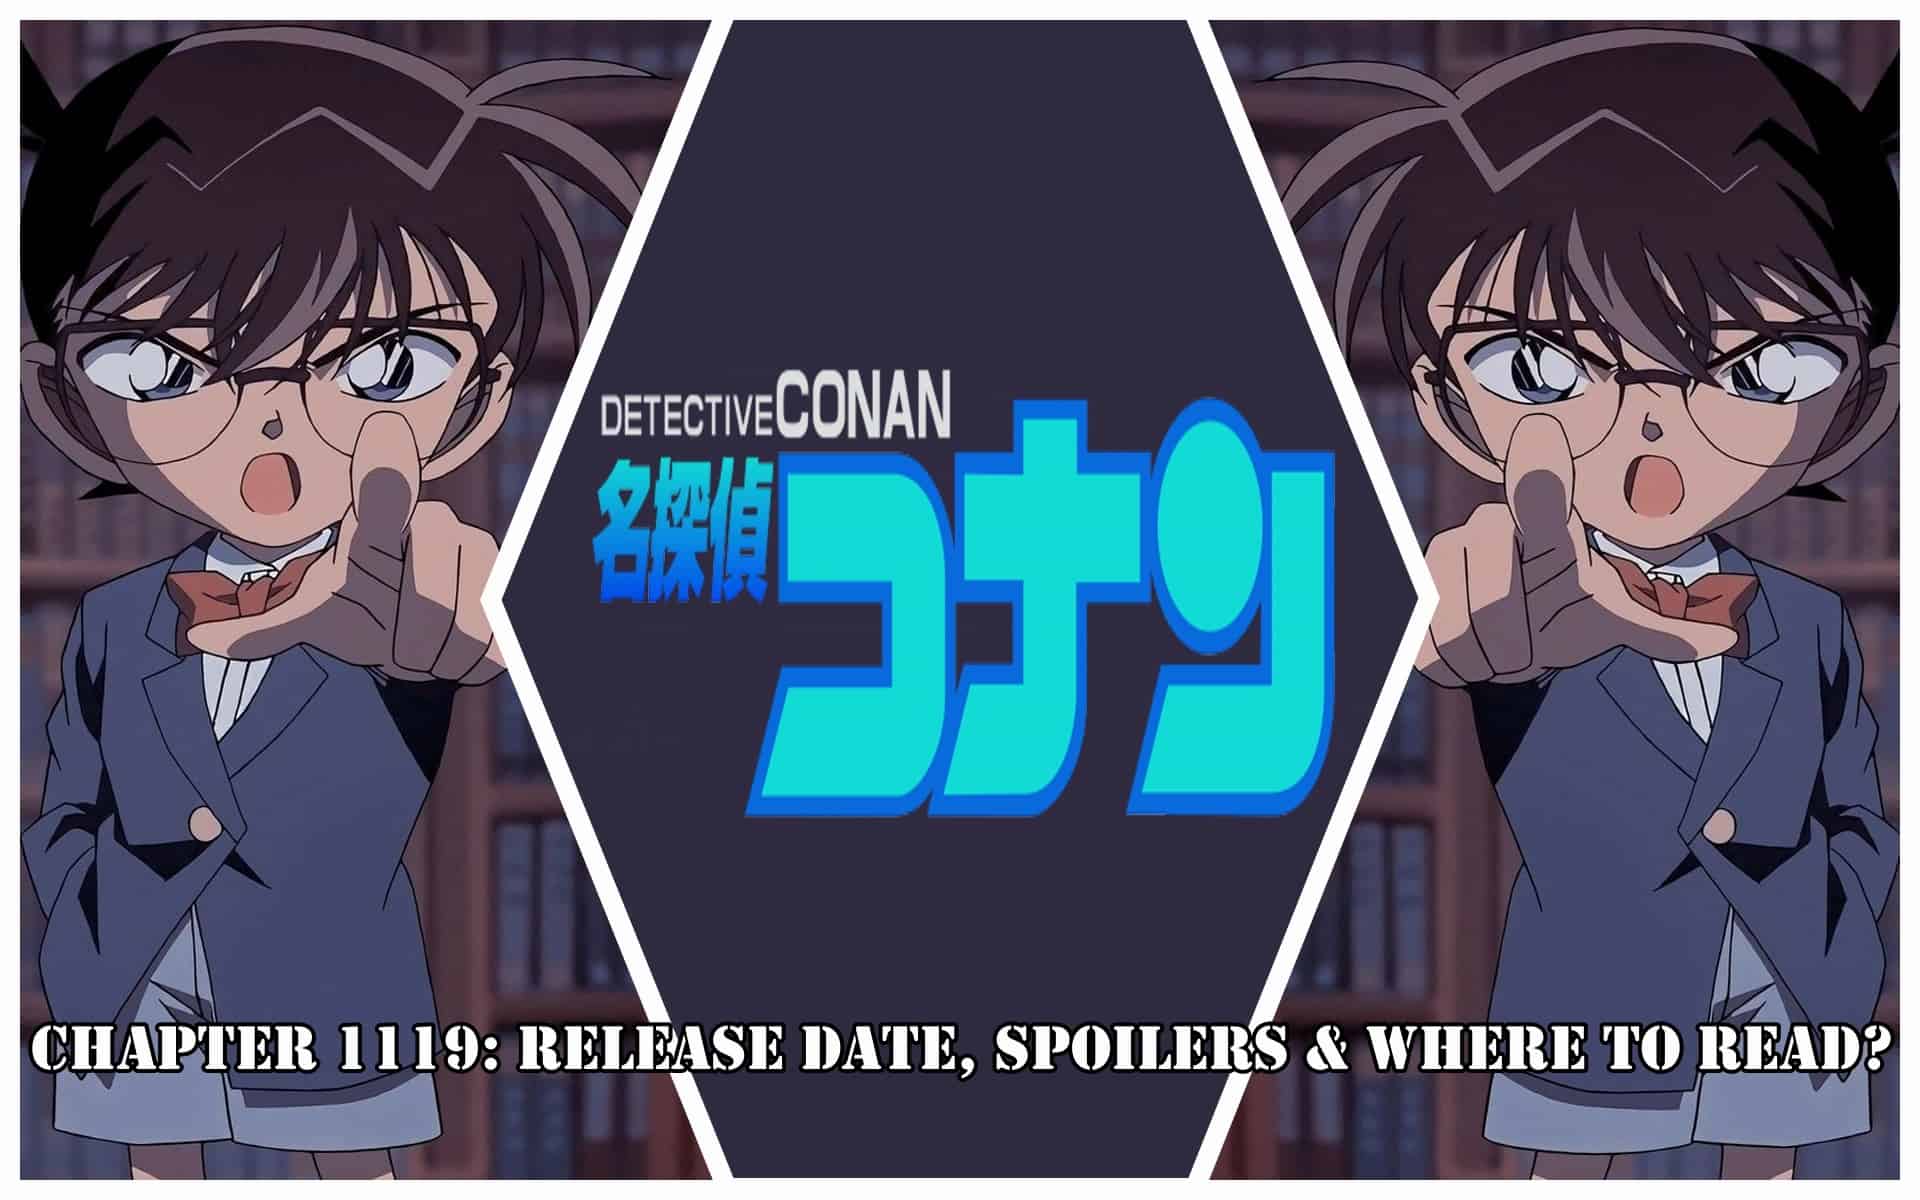 Detective Conan Chapter 1119: Release Date, Spoilers & Where to Read?